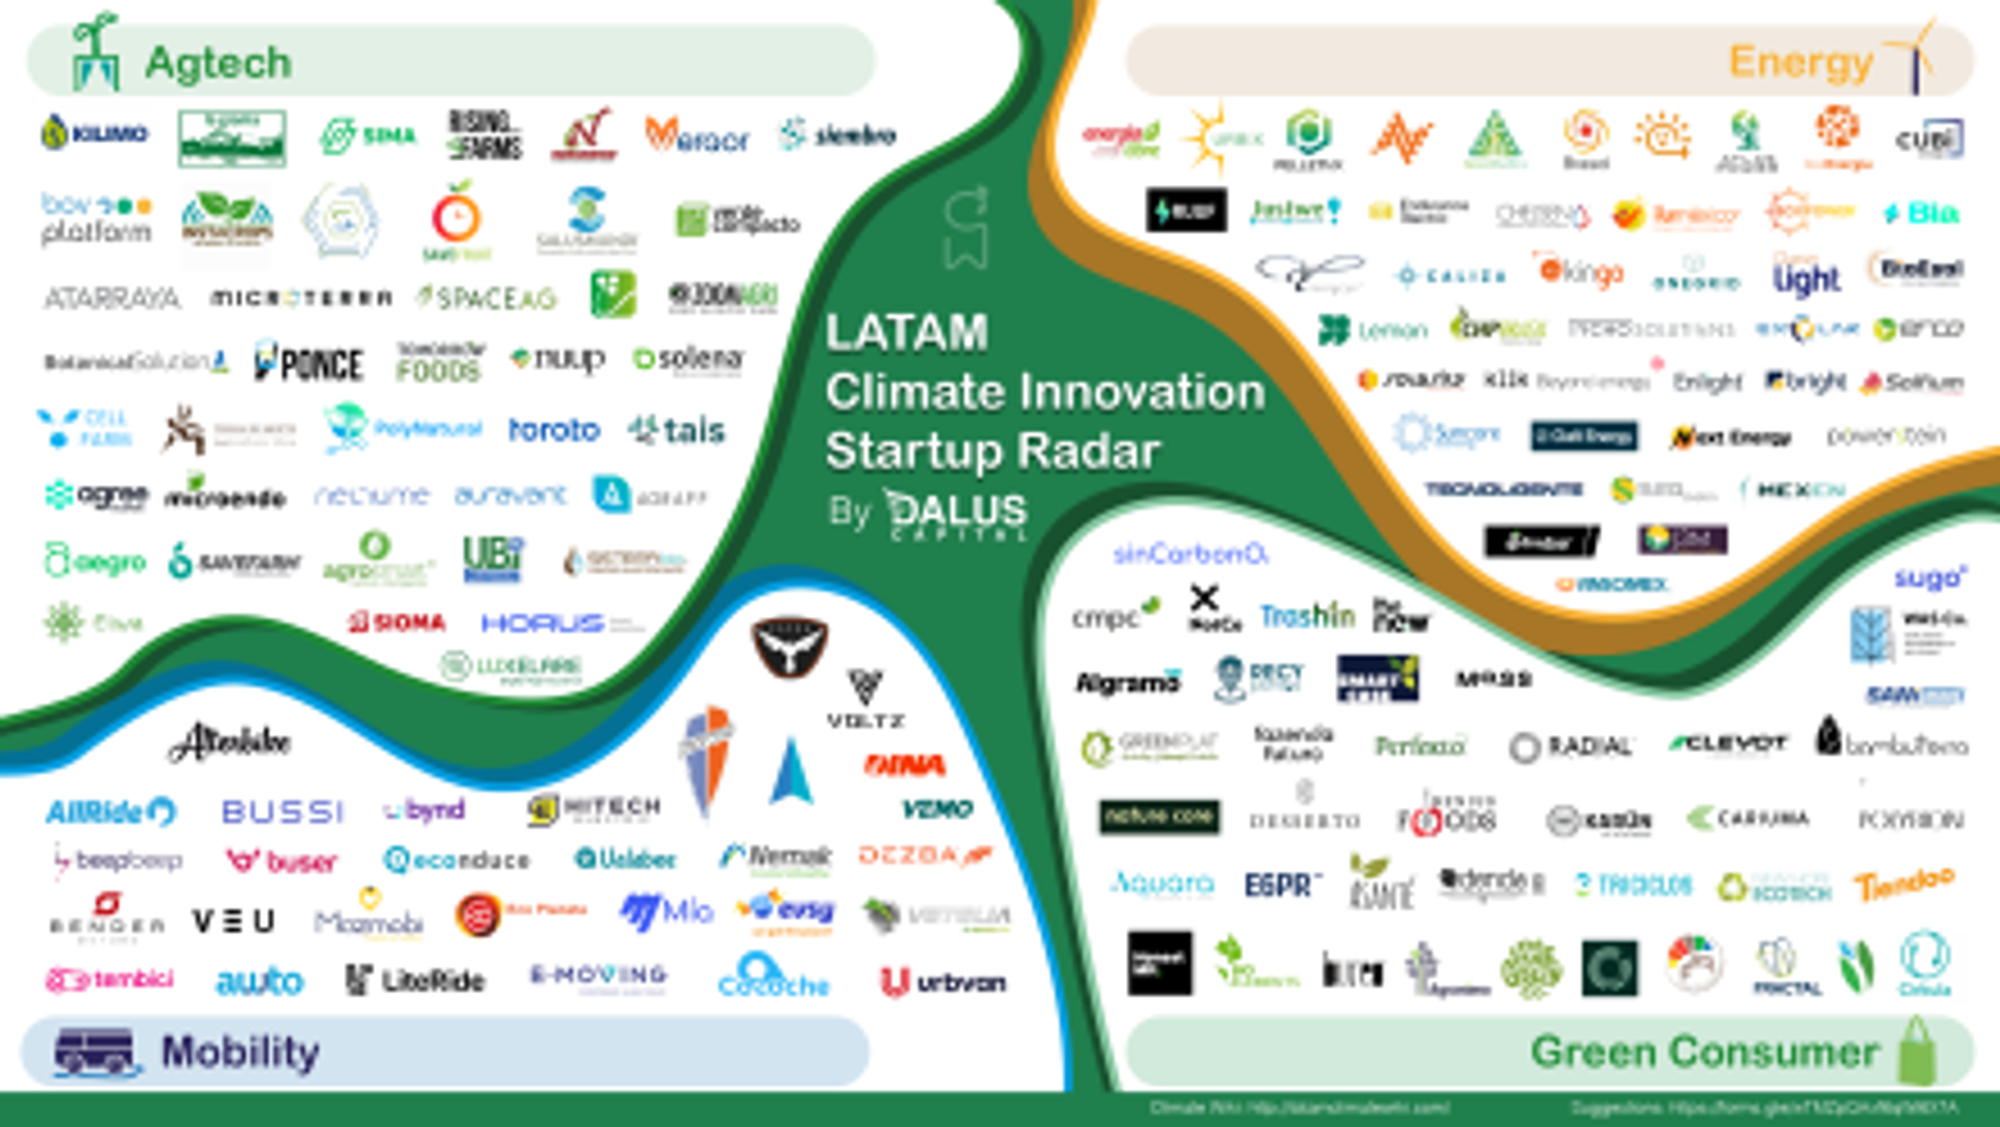 Latin America Climate Innovation Startup Radar and other resources